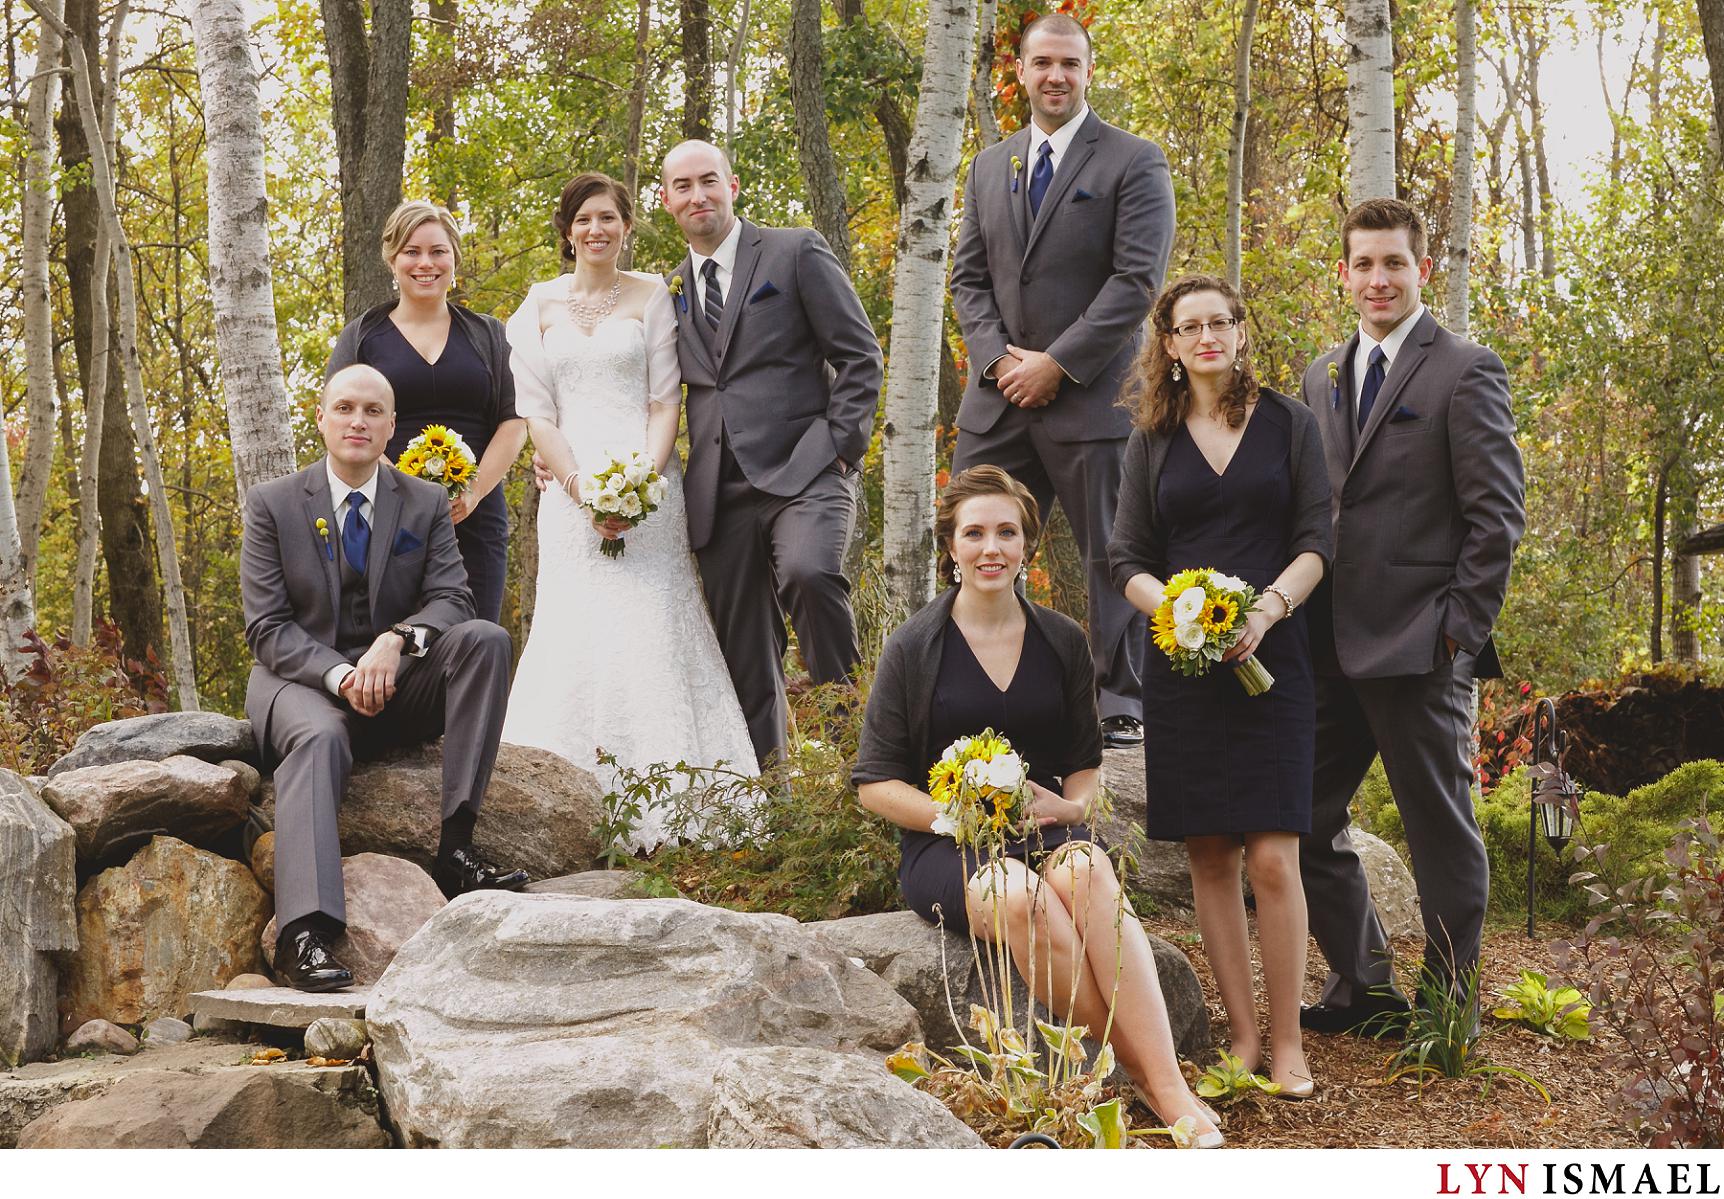 Wedding party portrait outdoors in the fall.